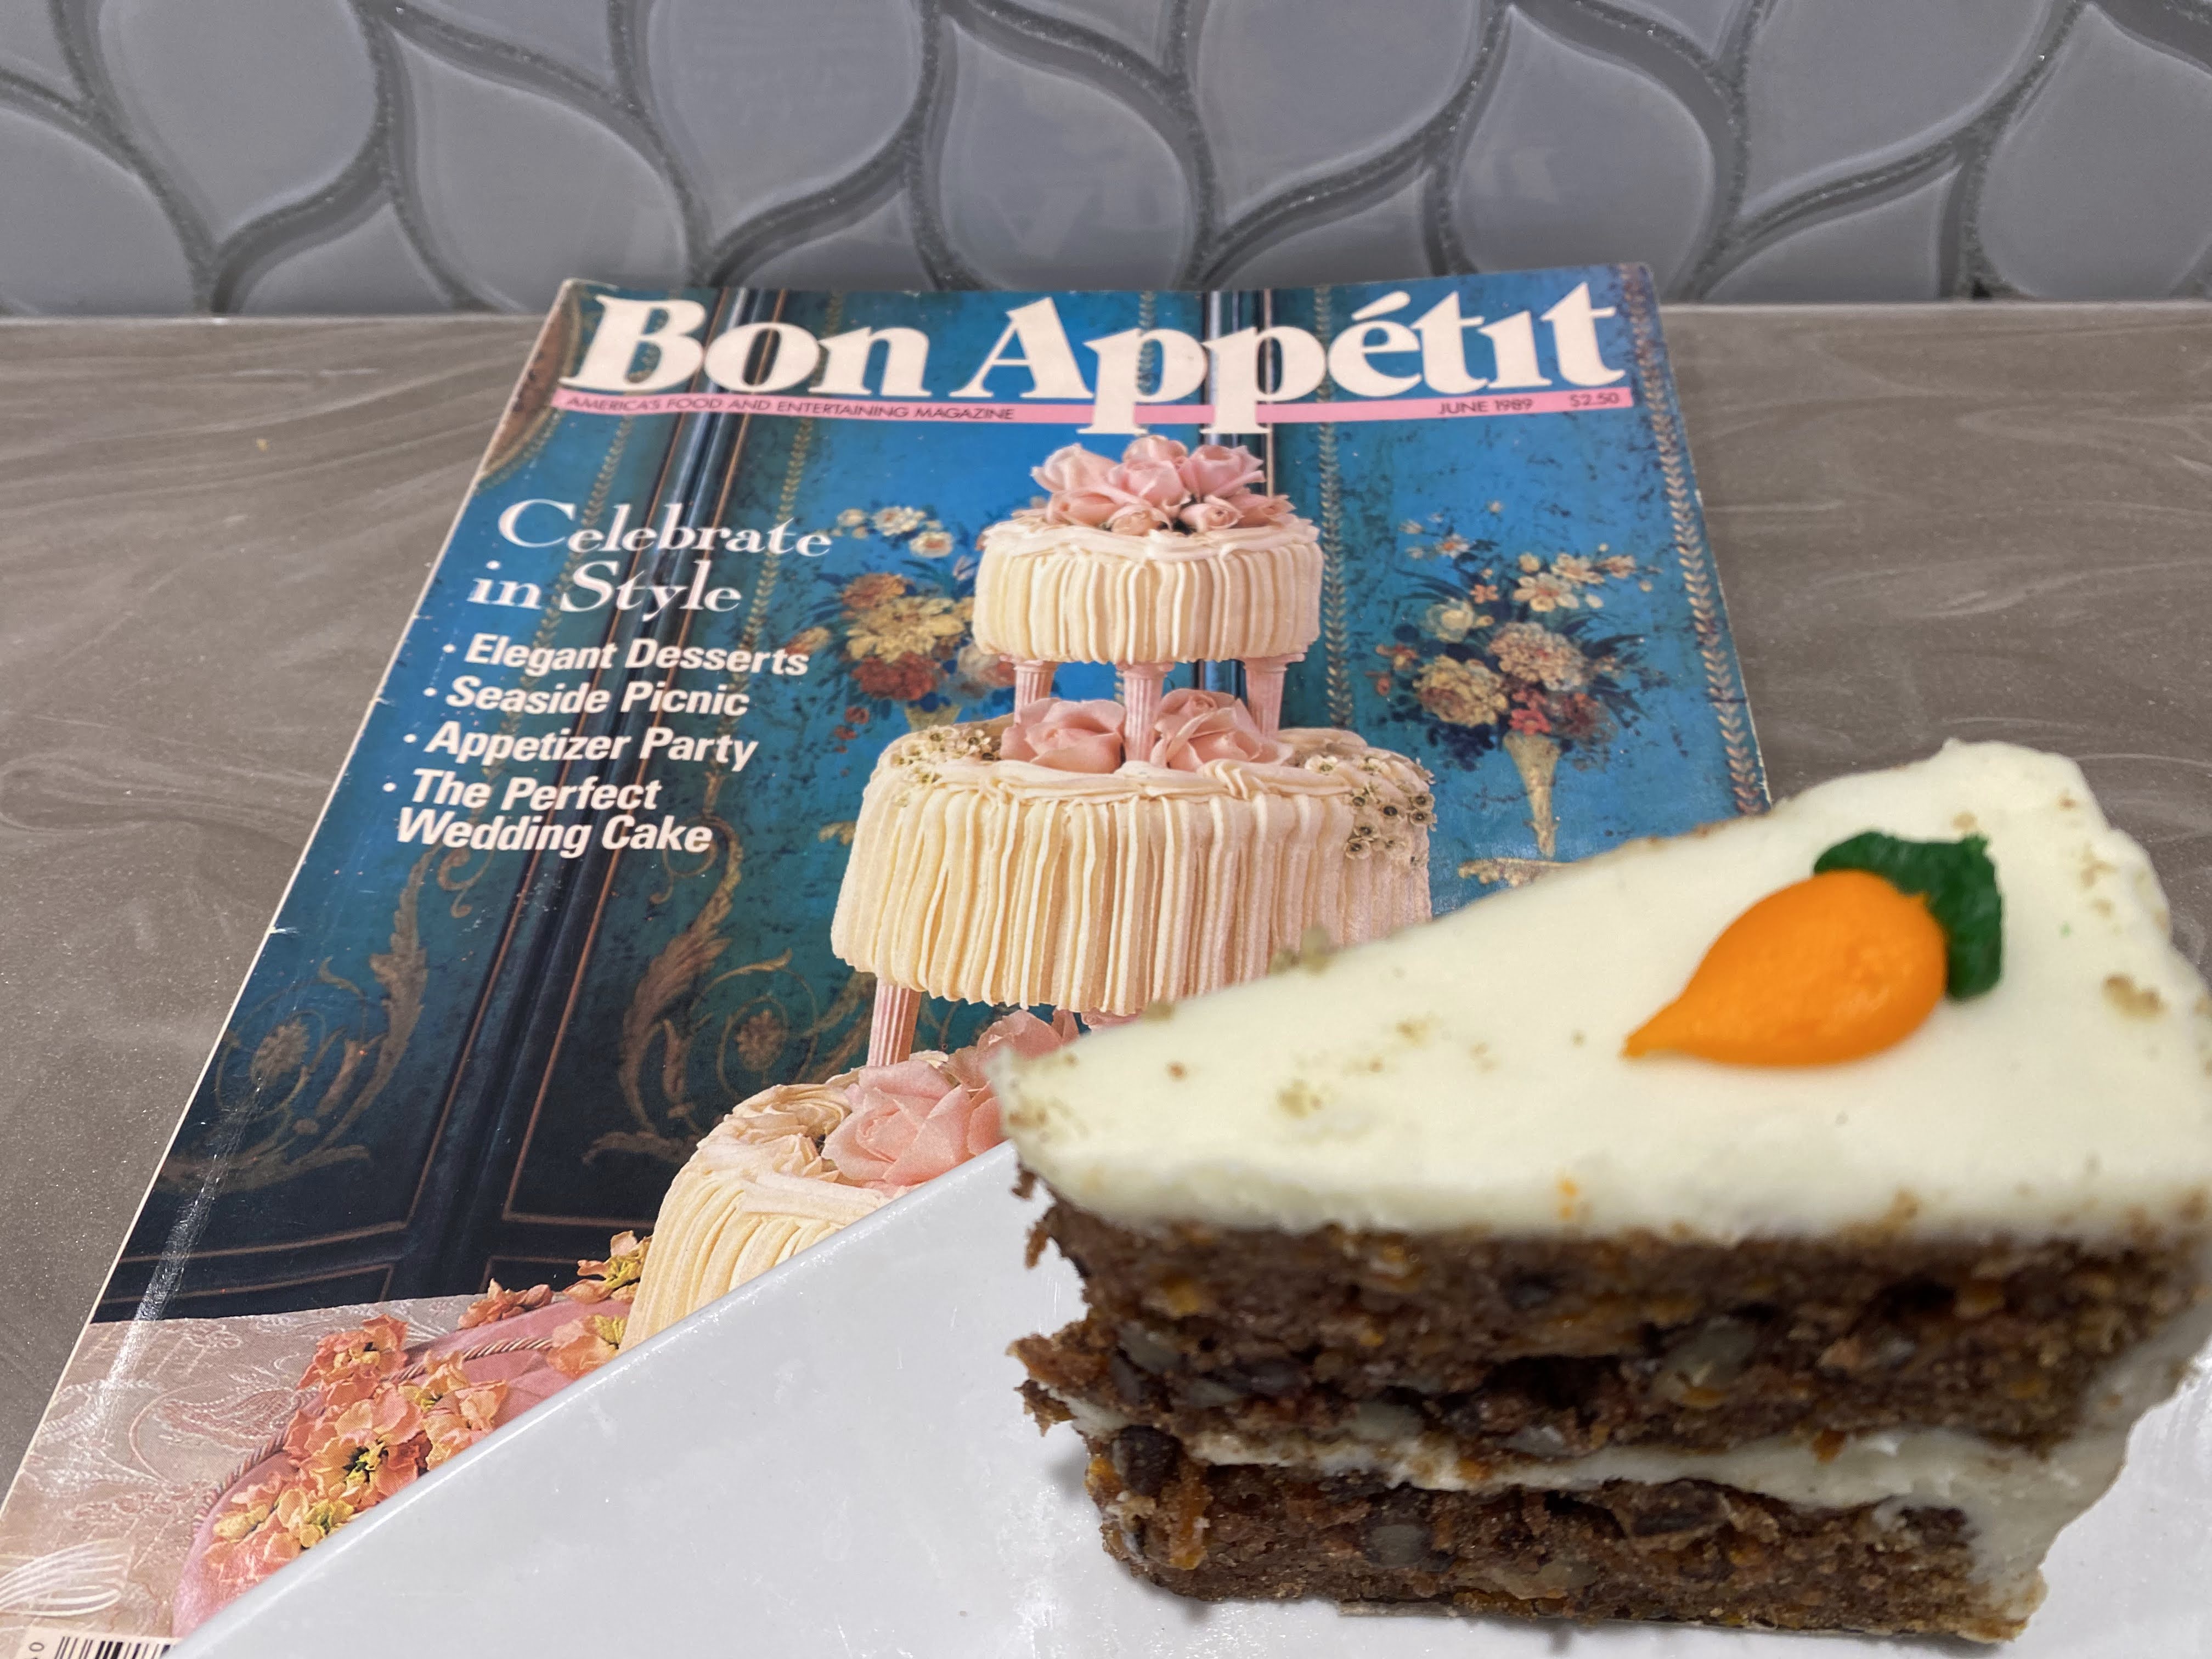 A slice of carrot cake on top of a magazine